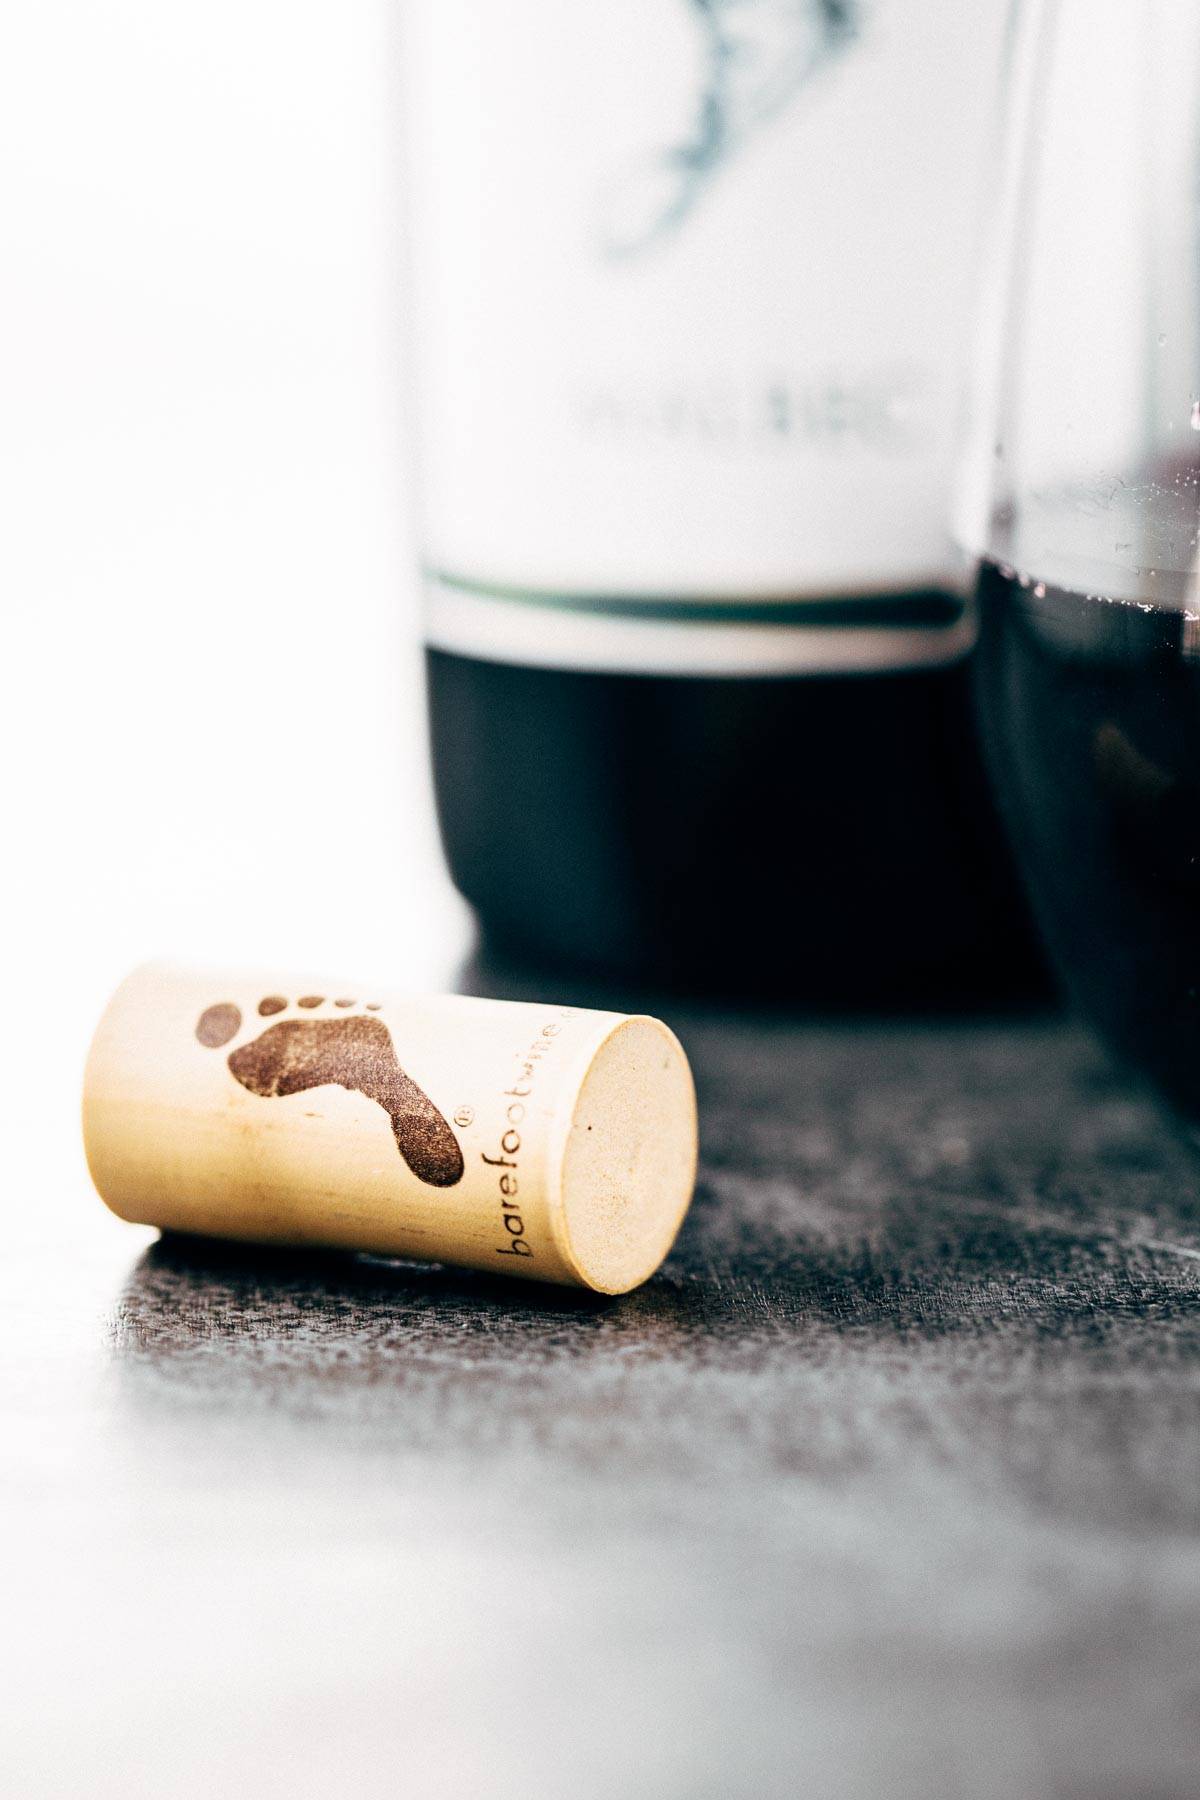 Cork from a wine glass.